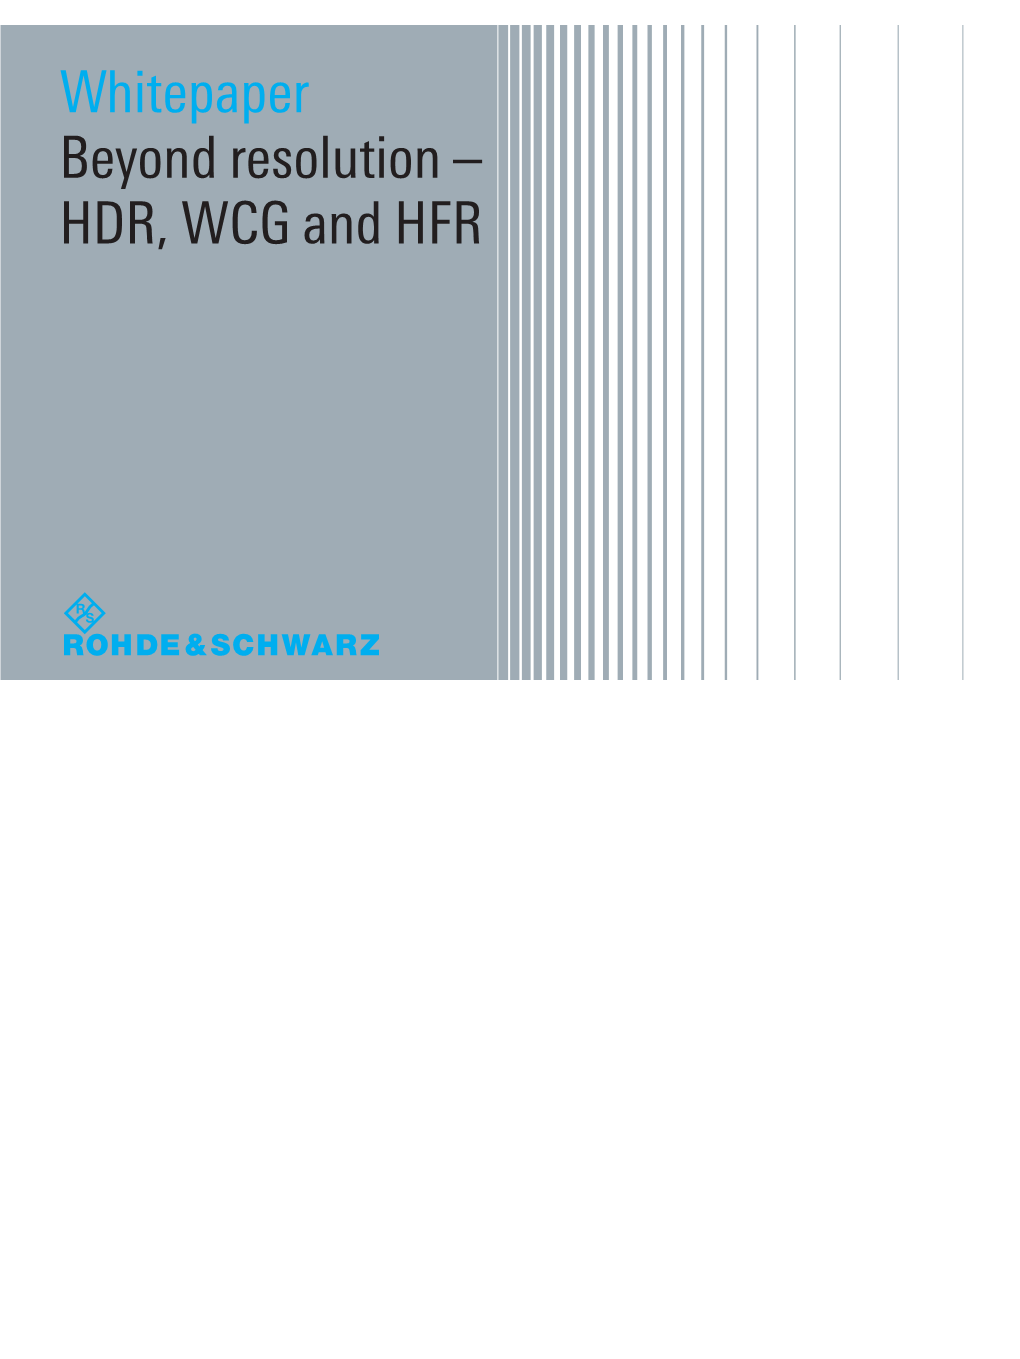 Beyond Resolution – HDR, WCG and HFR